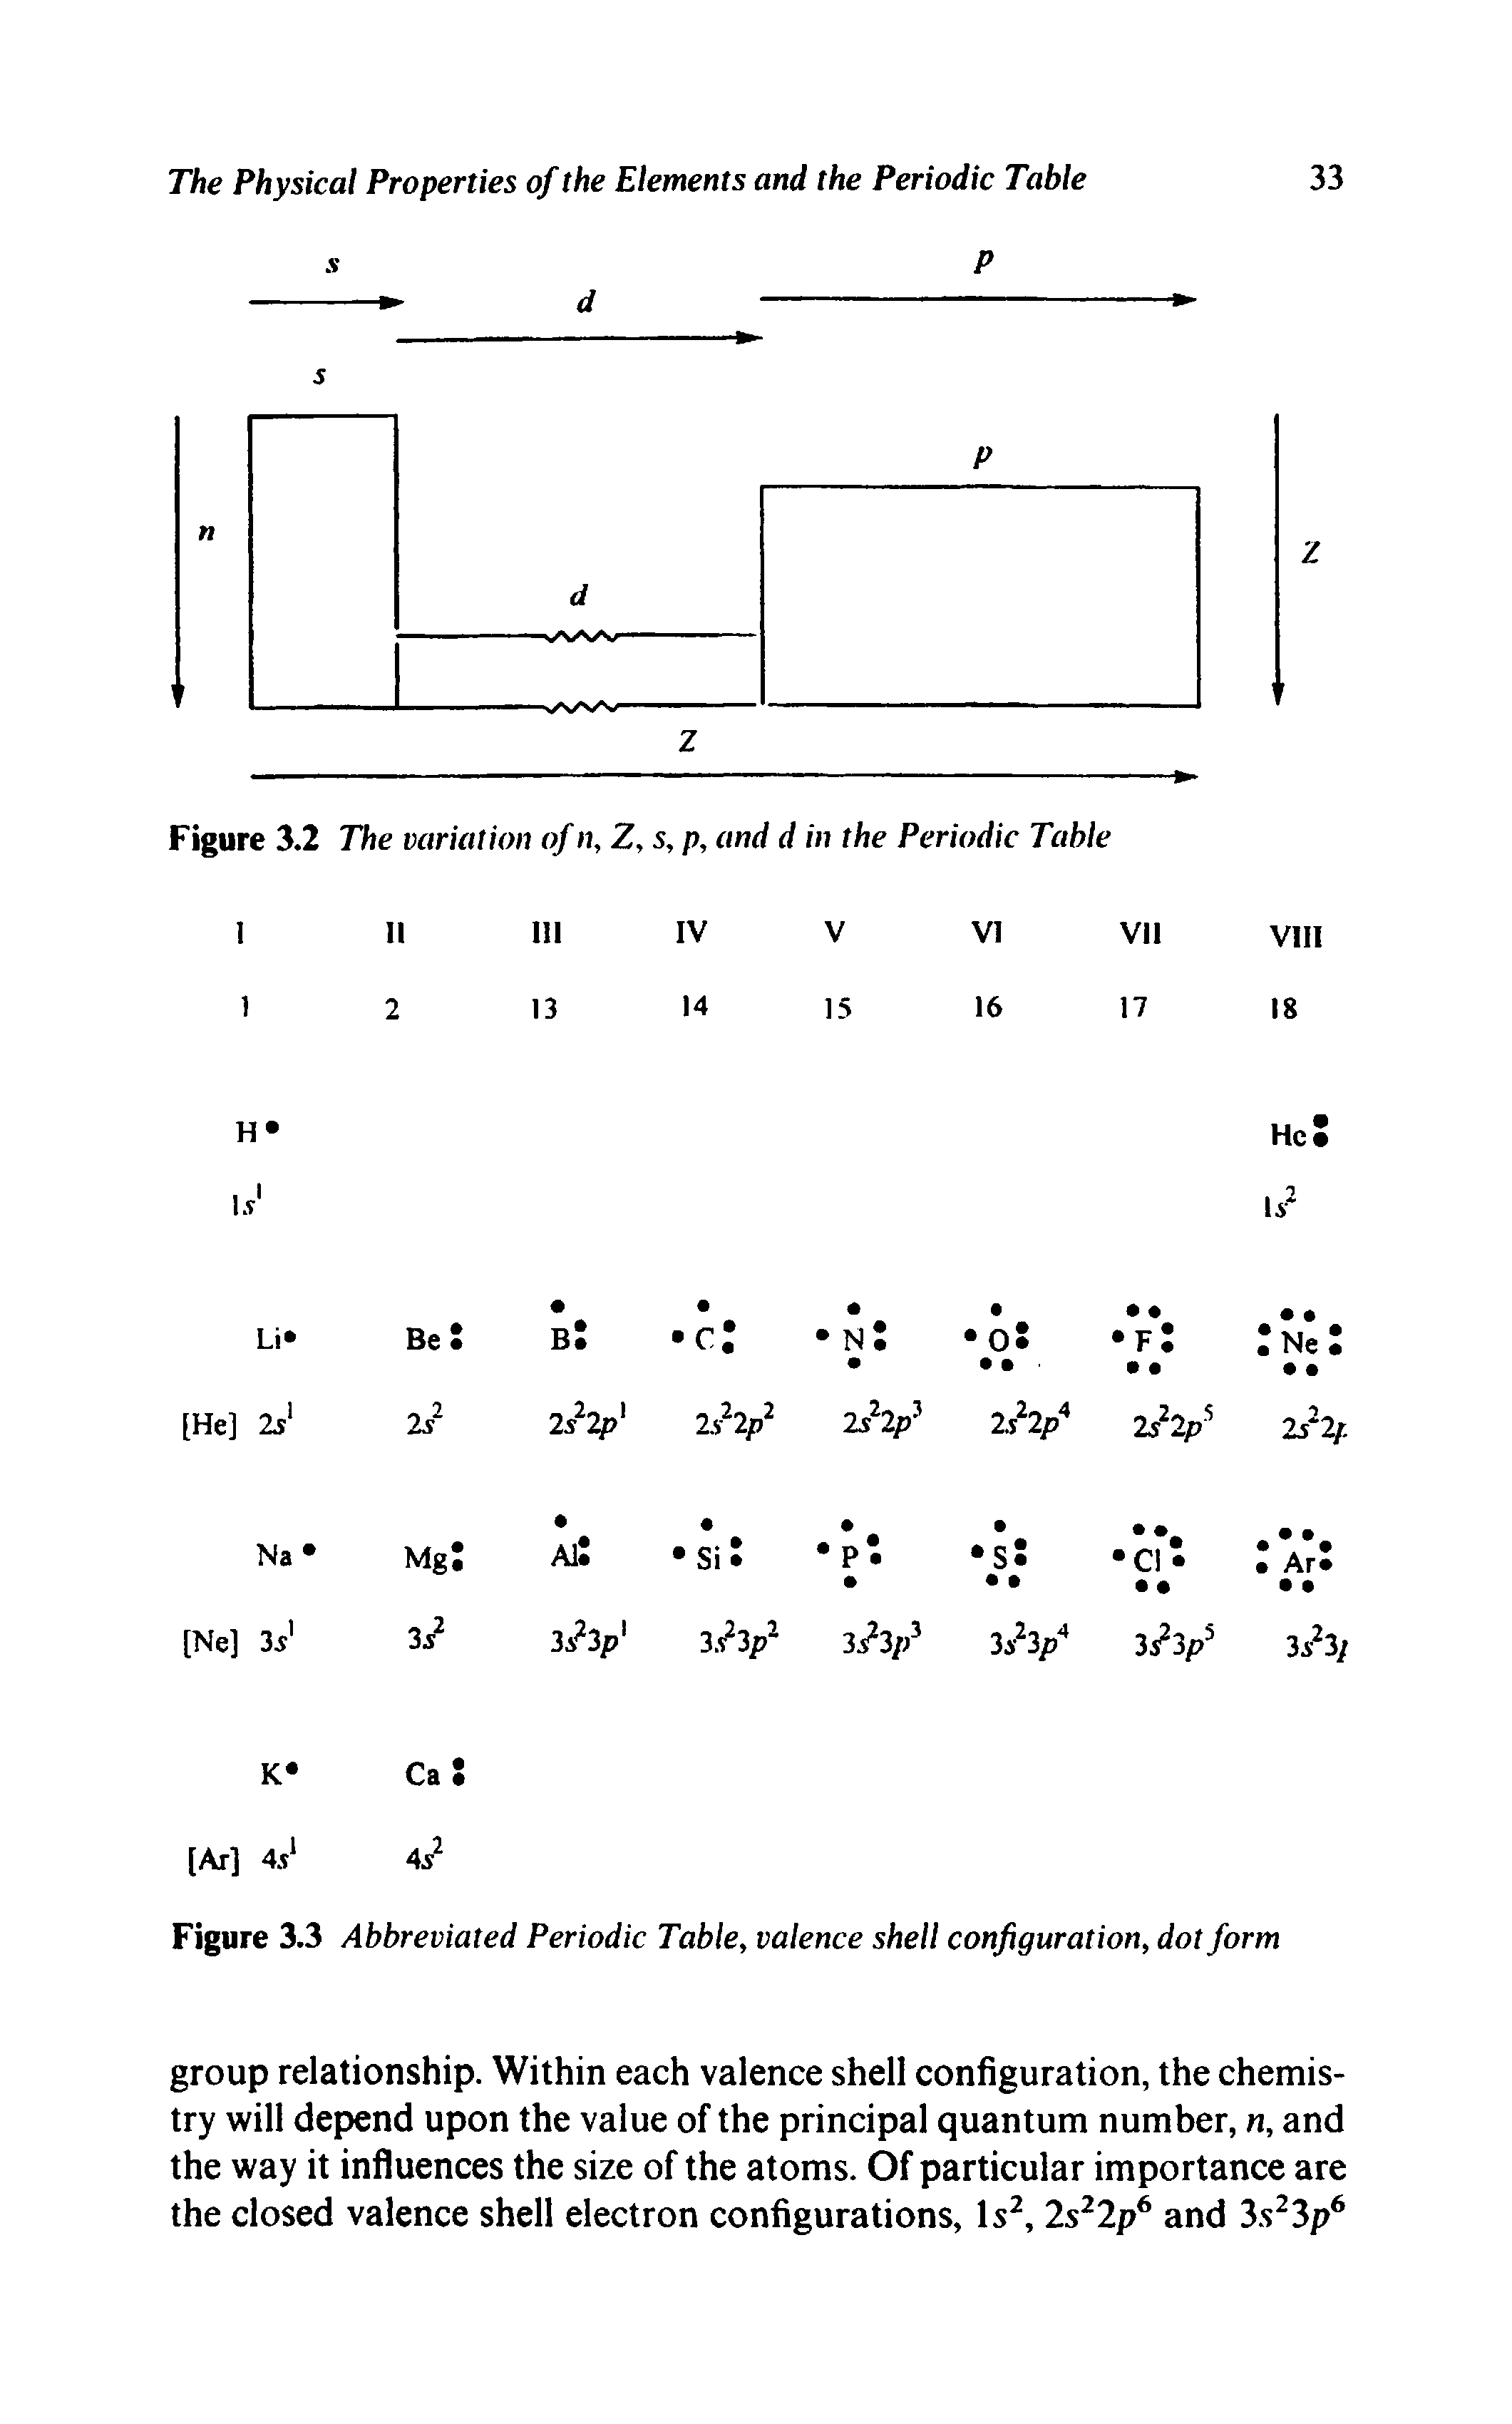 Figure 3.3 Abbreviated Periodic Table, valence shell configuration, dot form...